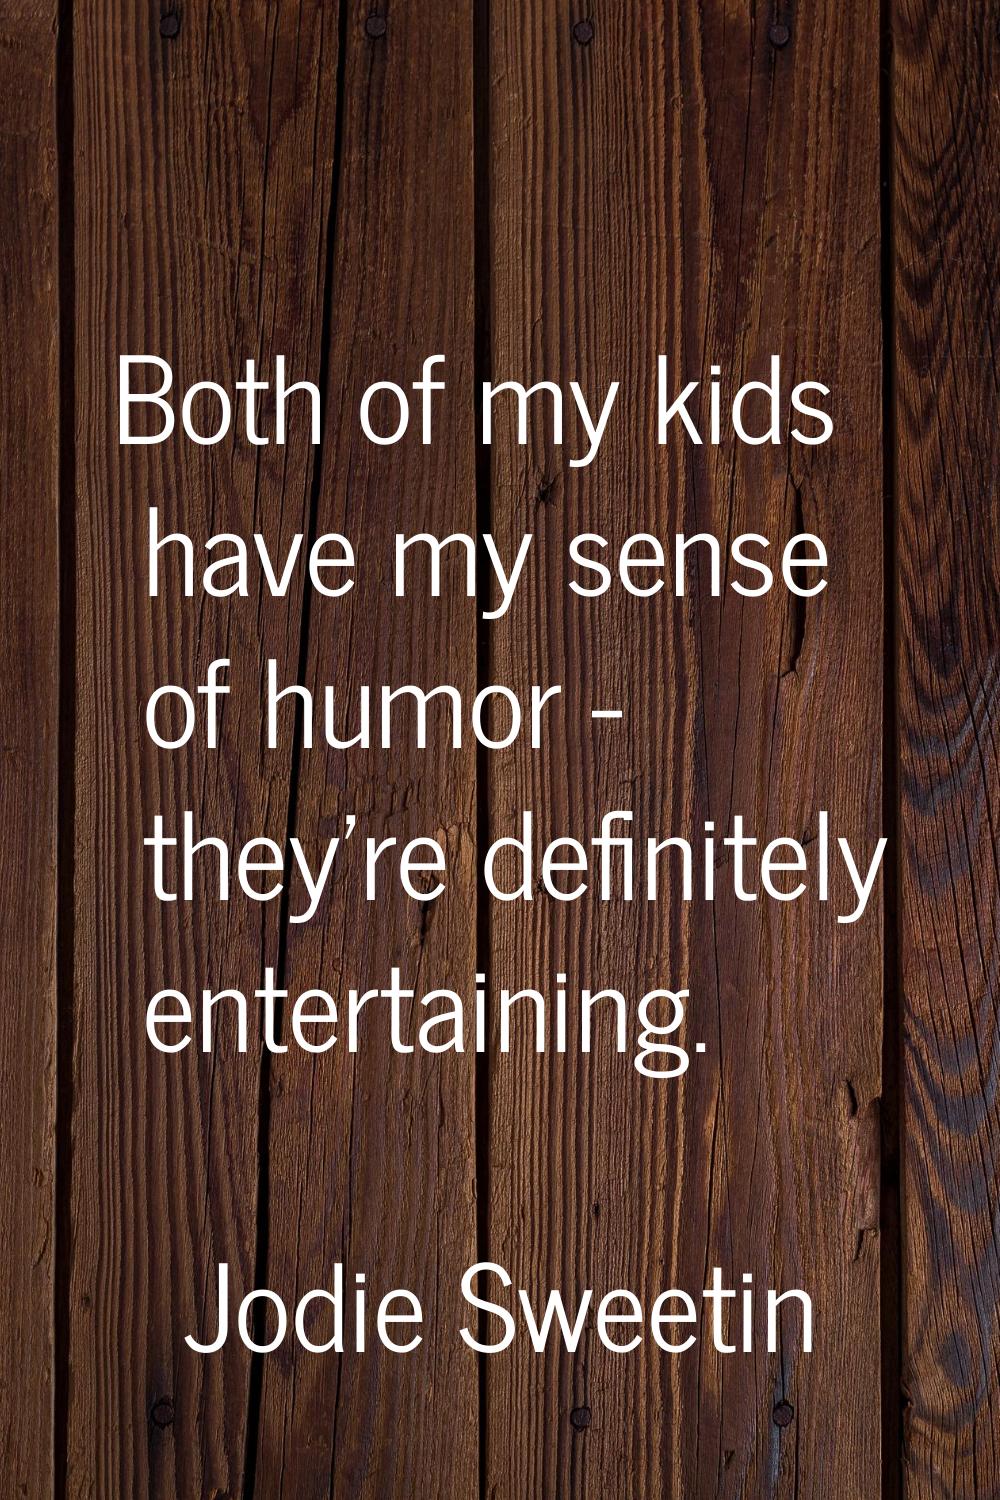 Both of my kids have my sense of humor - they're definitely entertaining.